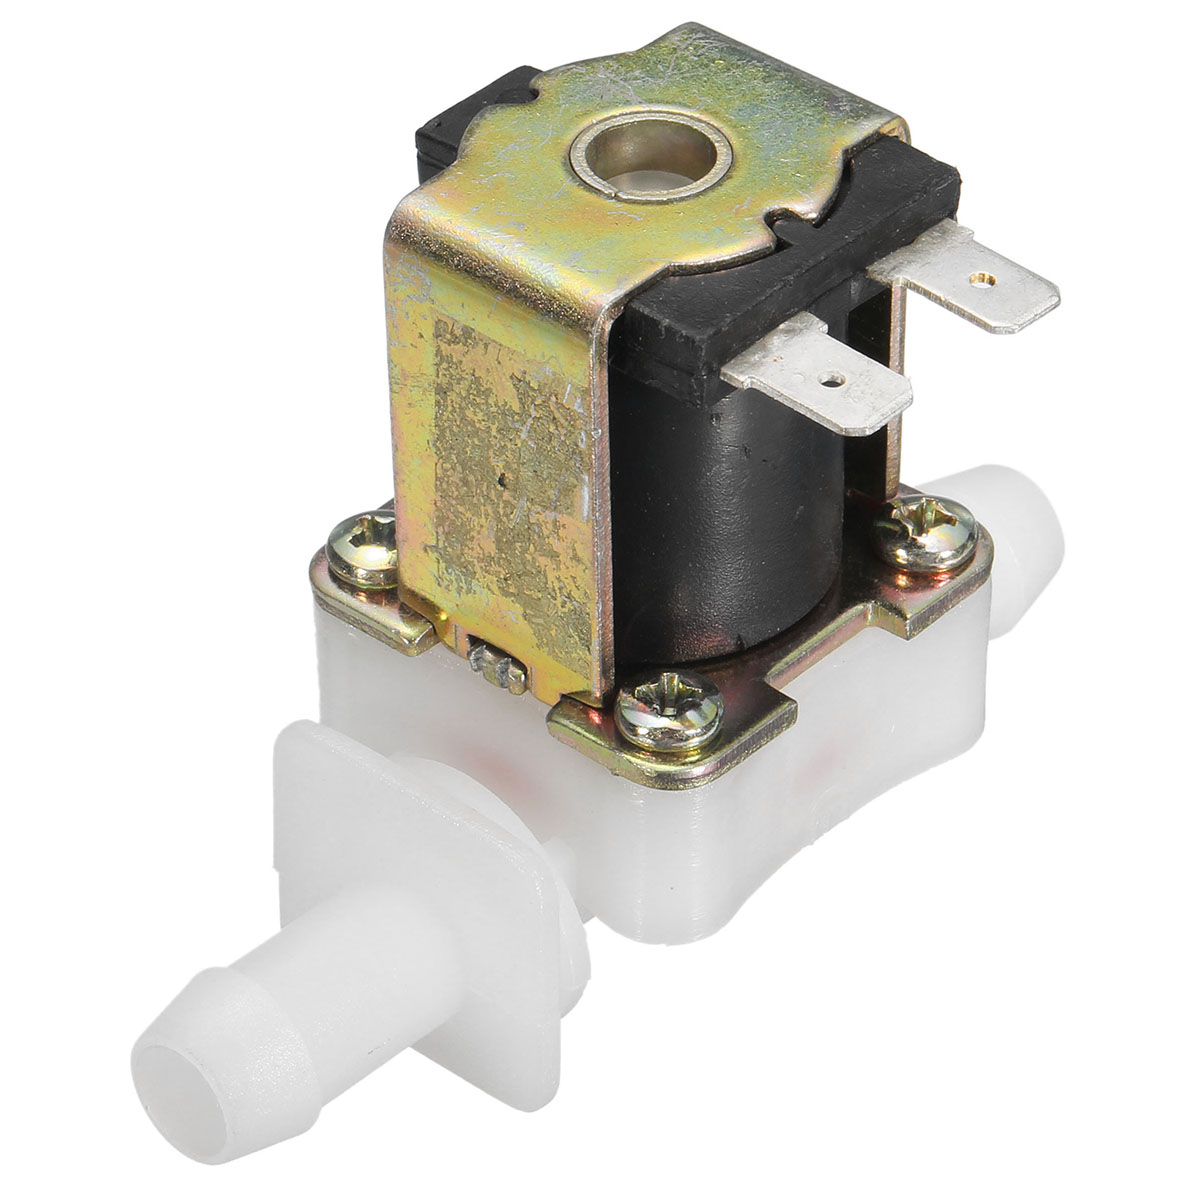 

12V DC Electric Solenoid Valve Water Air Inlet Flow Switch Normally Closed 12mm